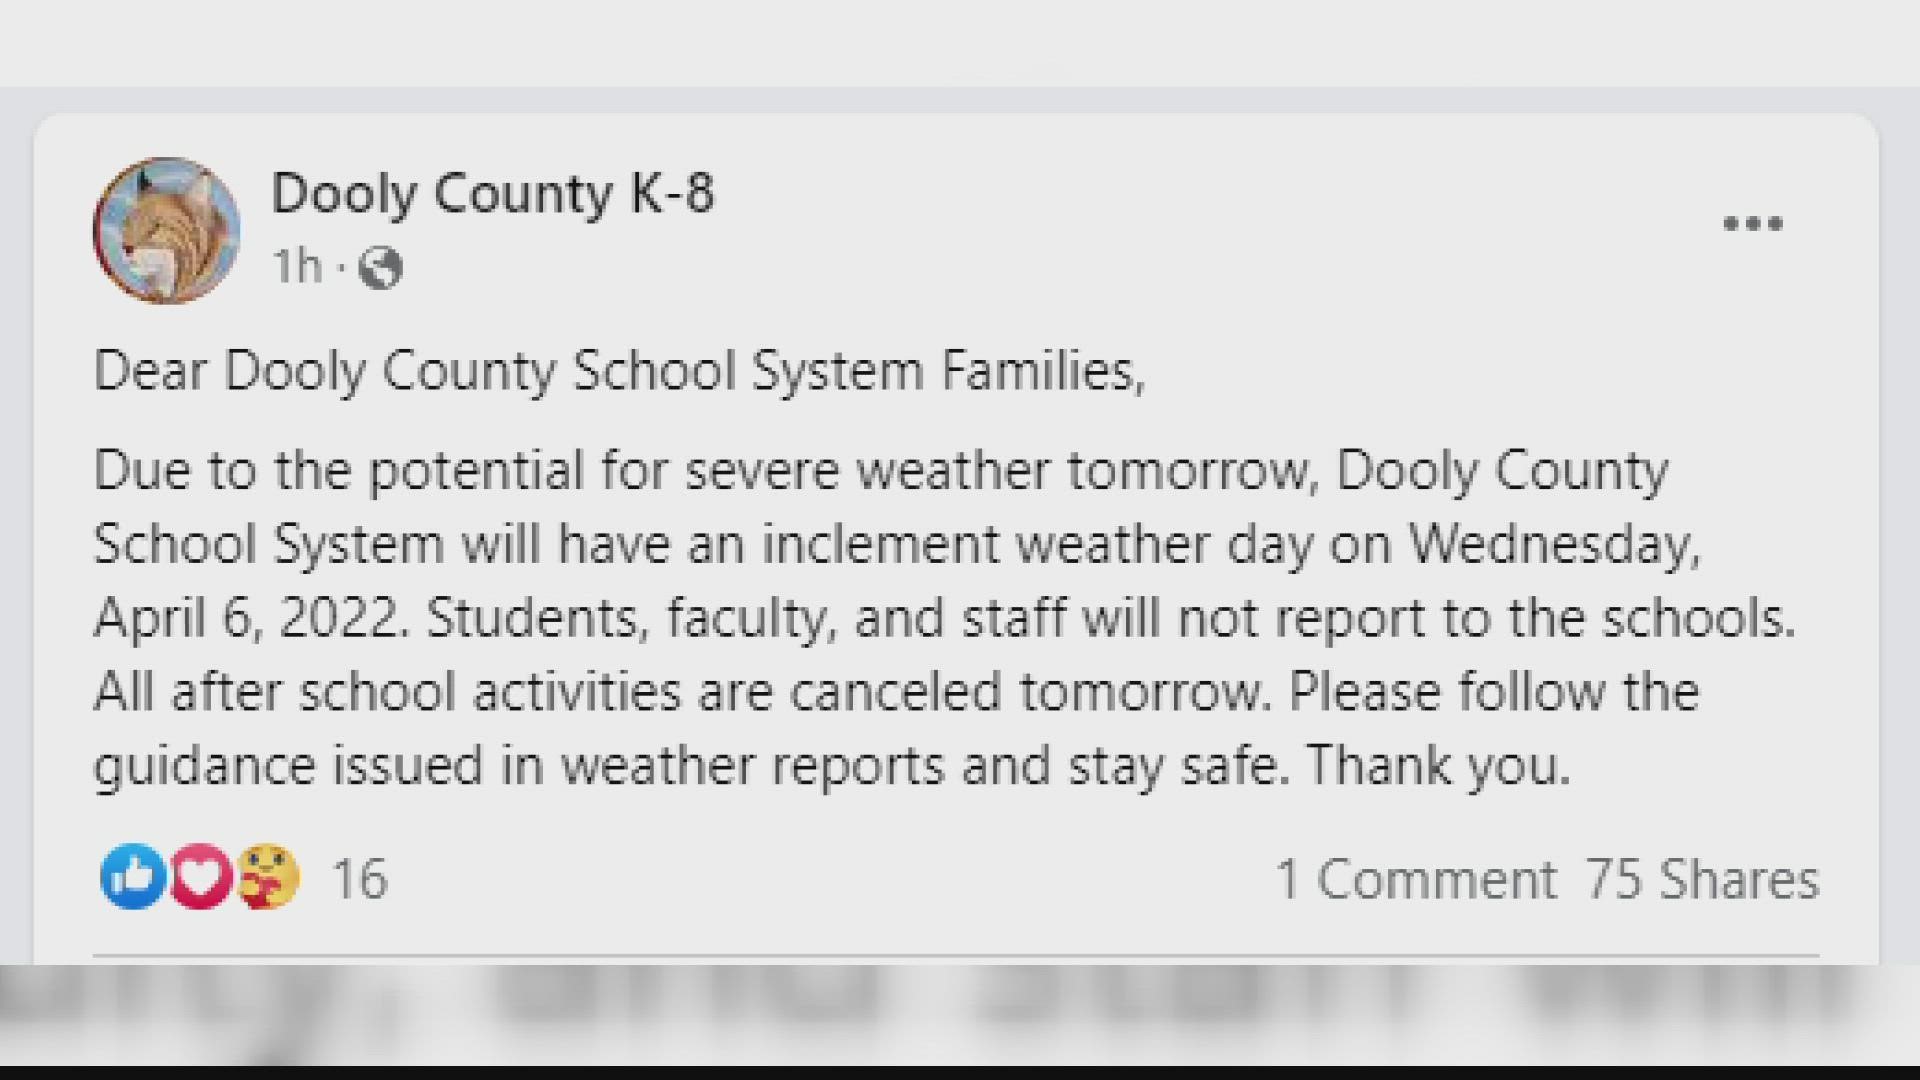 Students and staff will not report to school in Dooly County because of the potential for more severe weather Wednesday